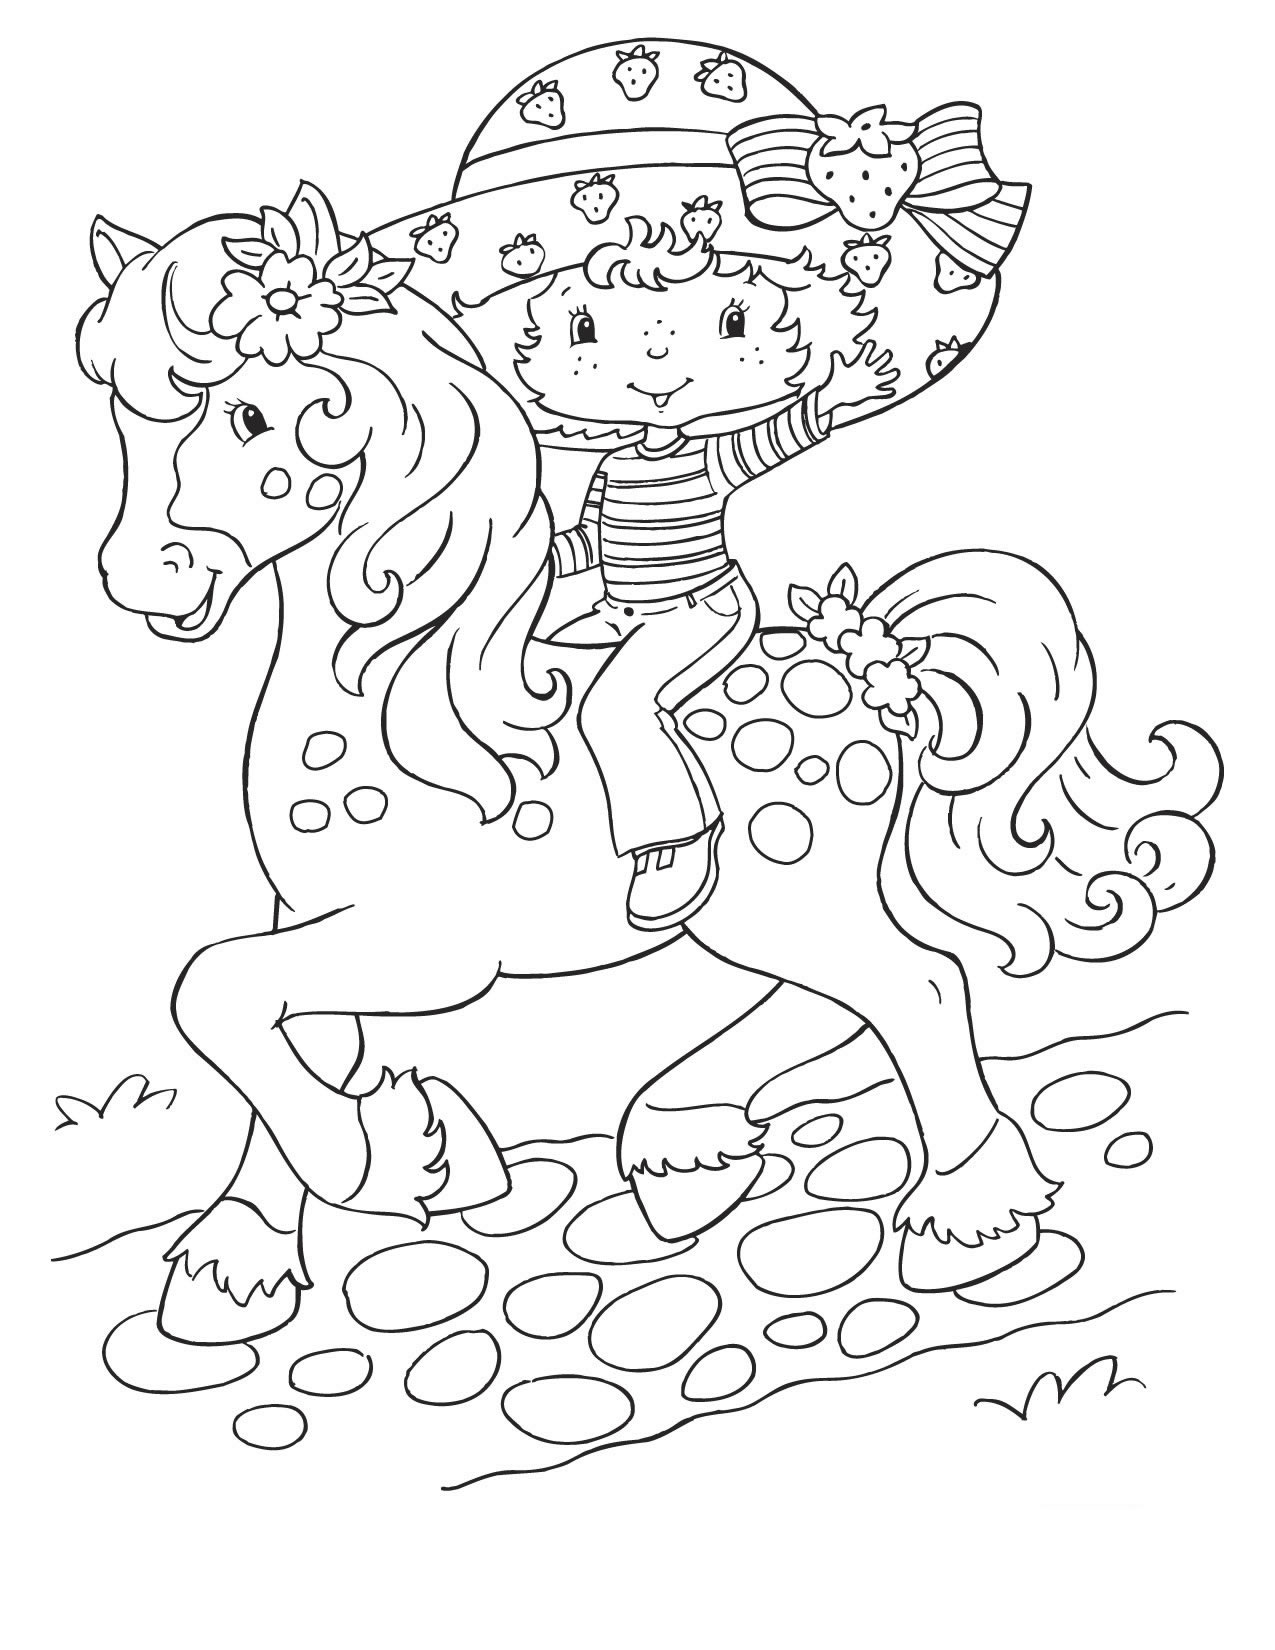 Strawberry Shortcake coloring pages for kids to print - Strawberry